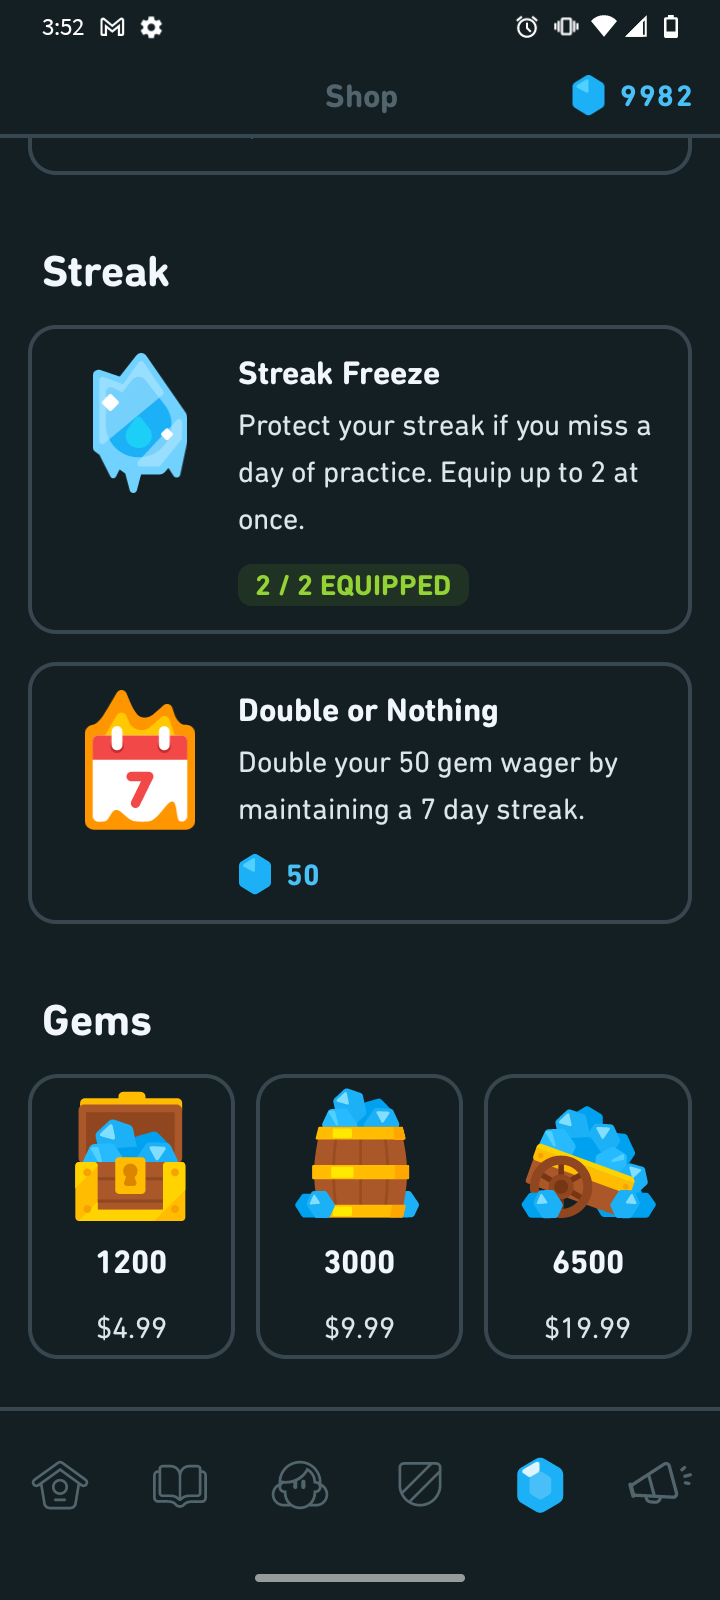 Buying gems and unlocking items in the Duolingo shop.